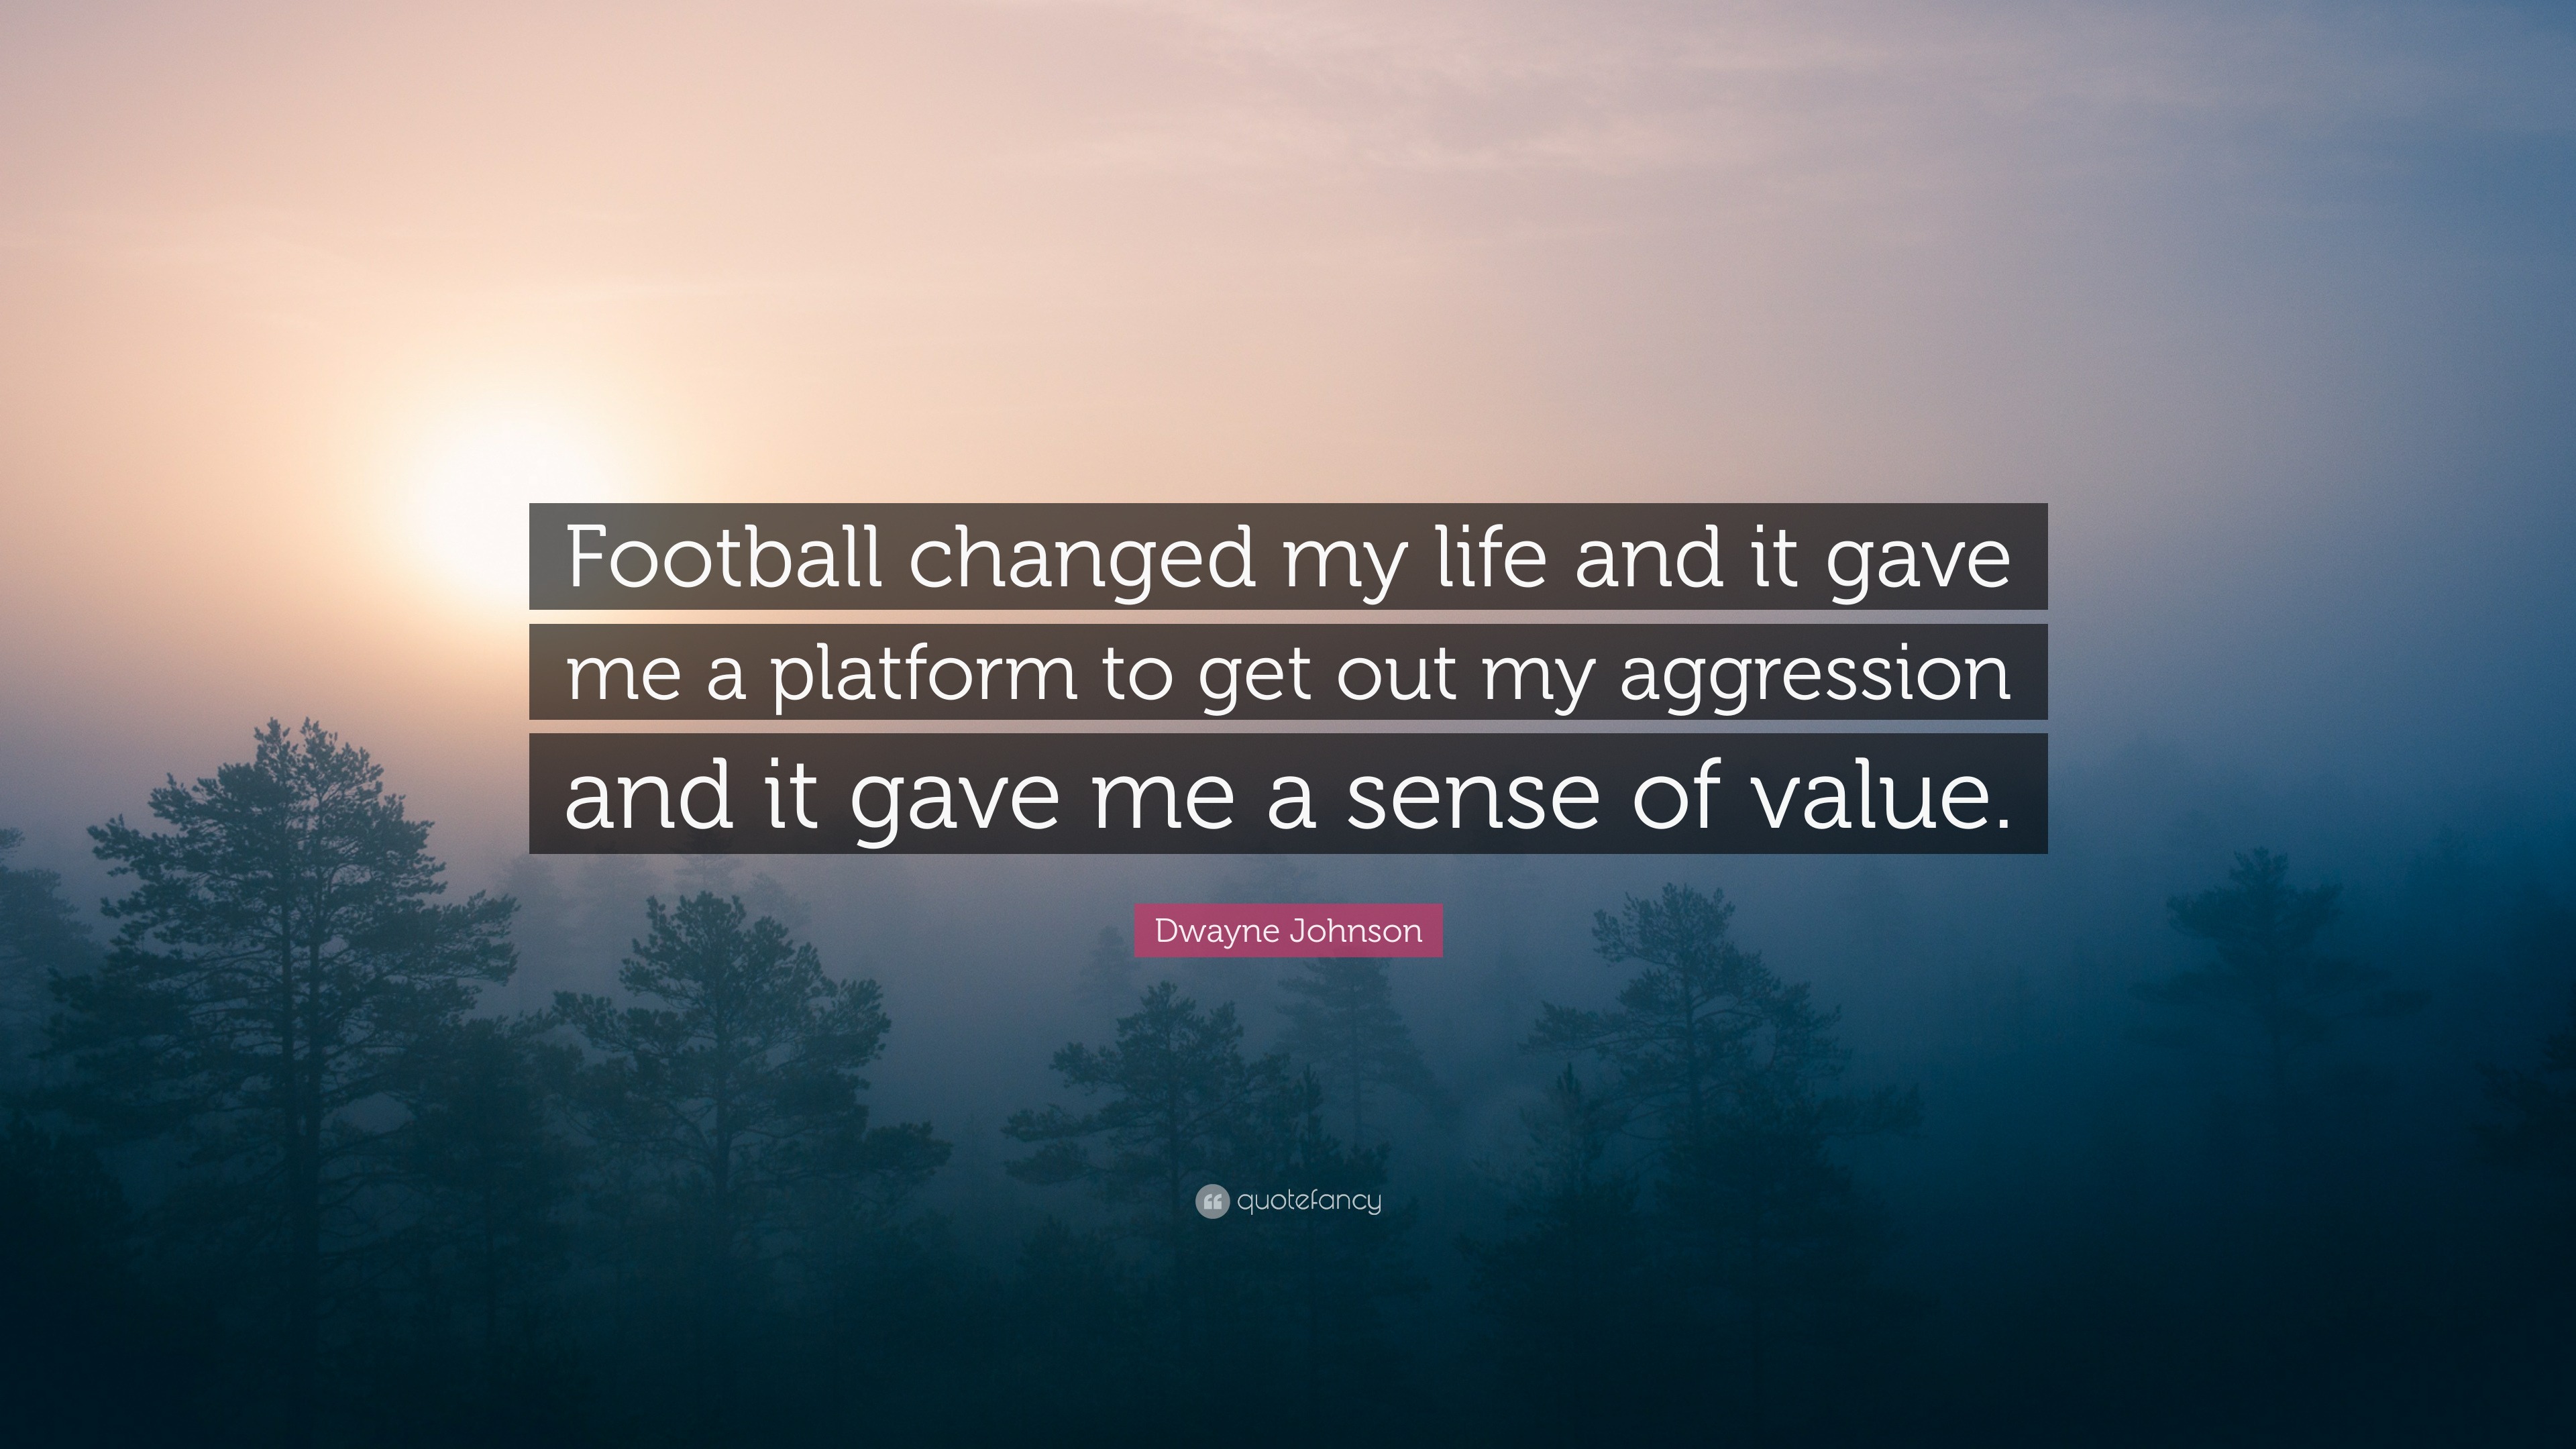 Dwayne Johnson Quote “Football changed my life and it gave me a platform to